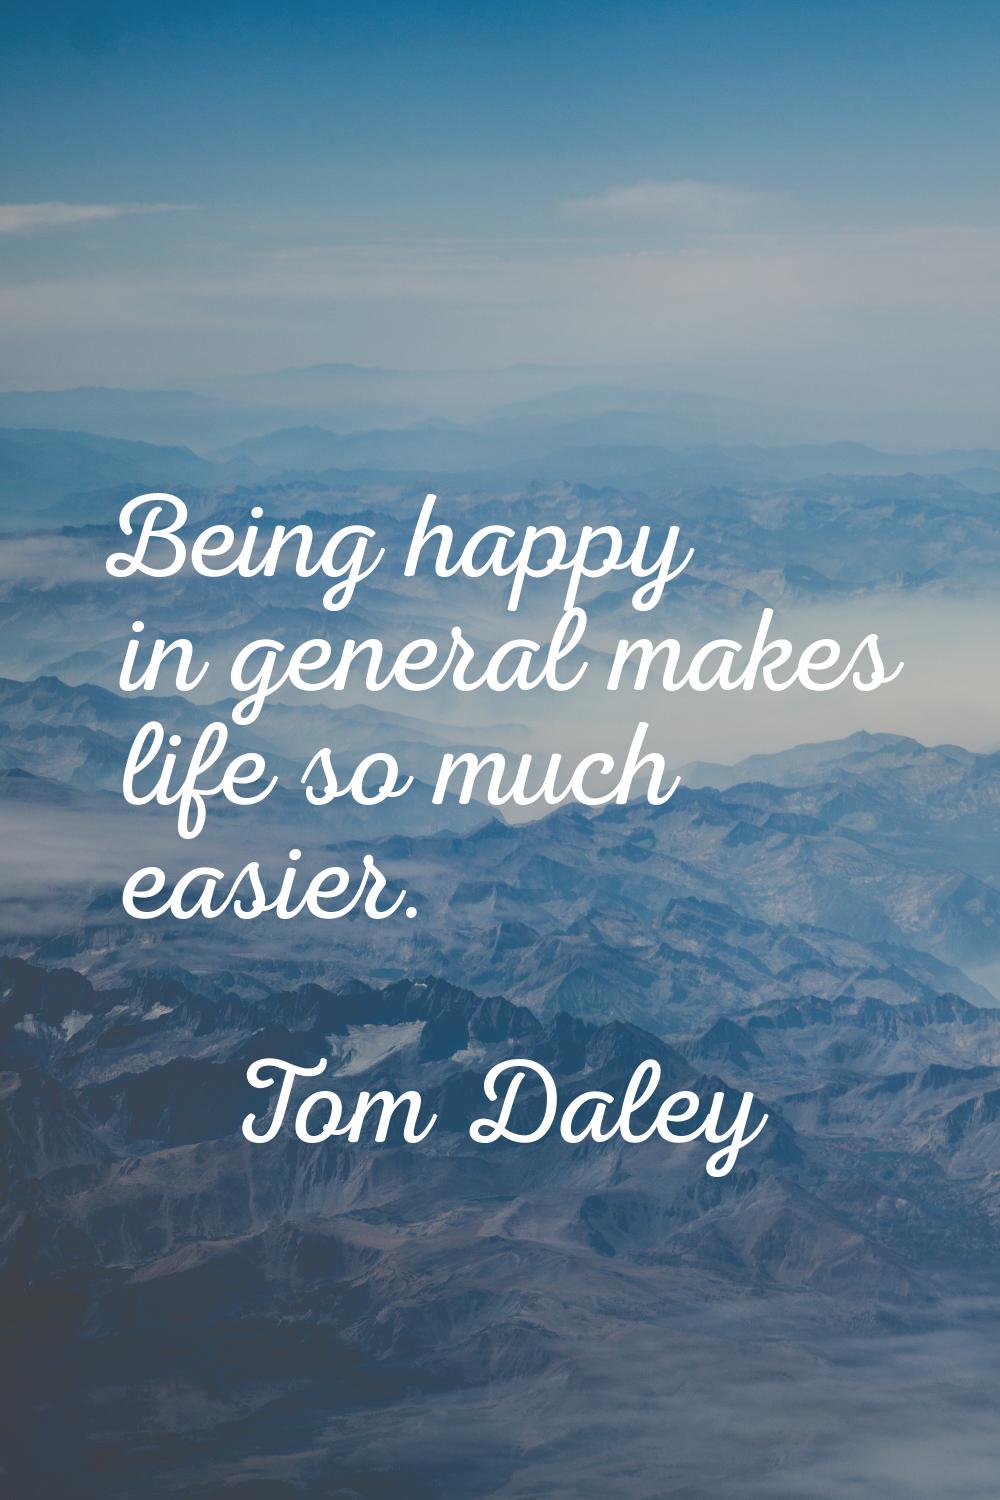 Being happy in general makes life so much easier.